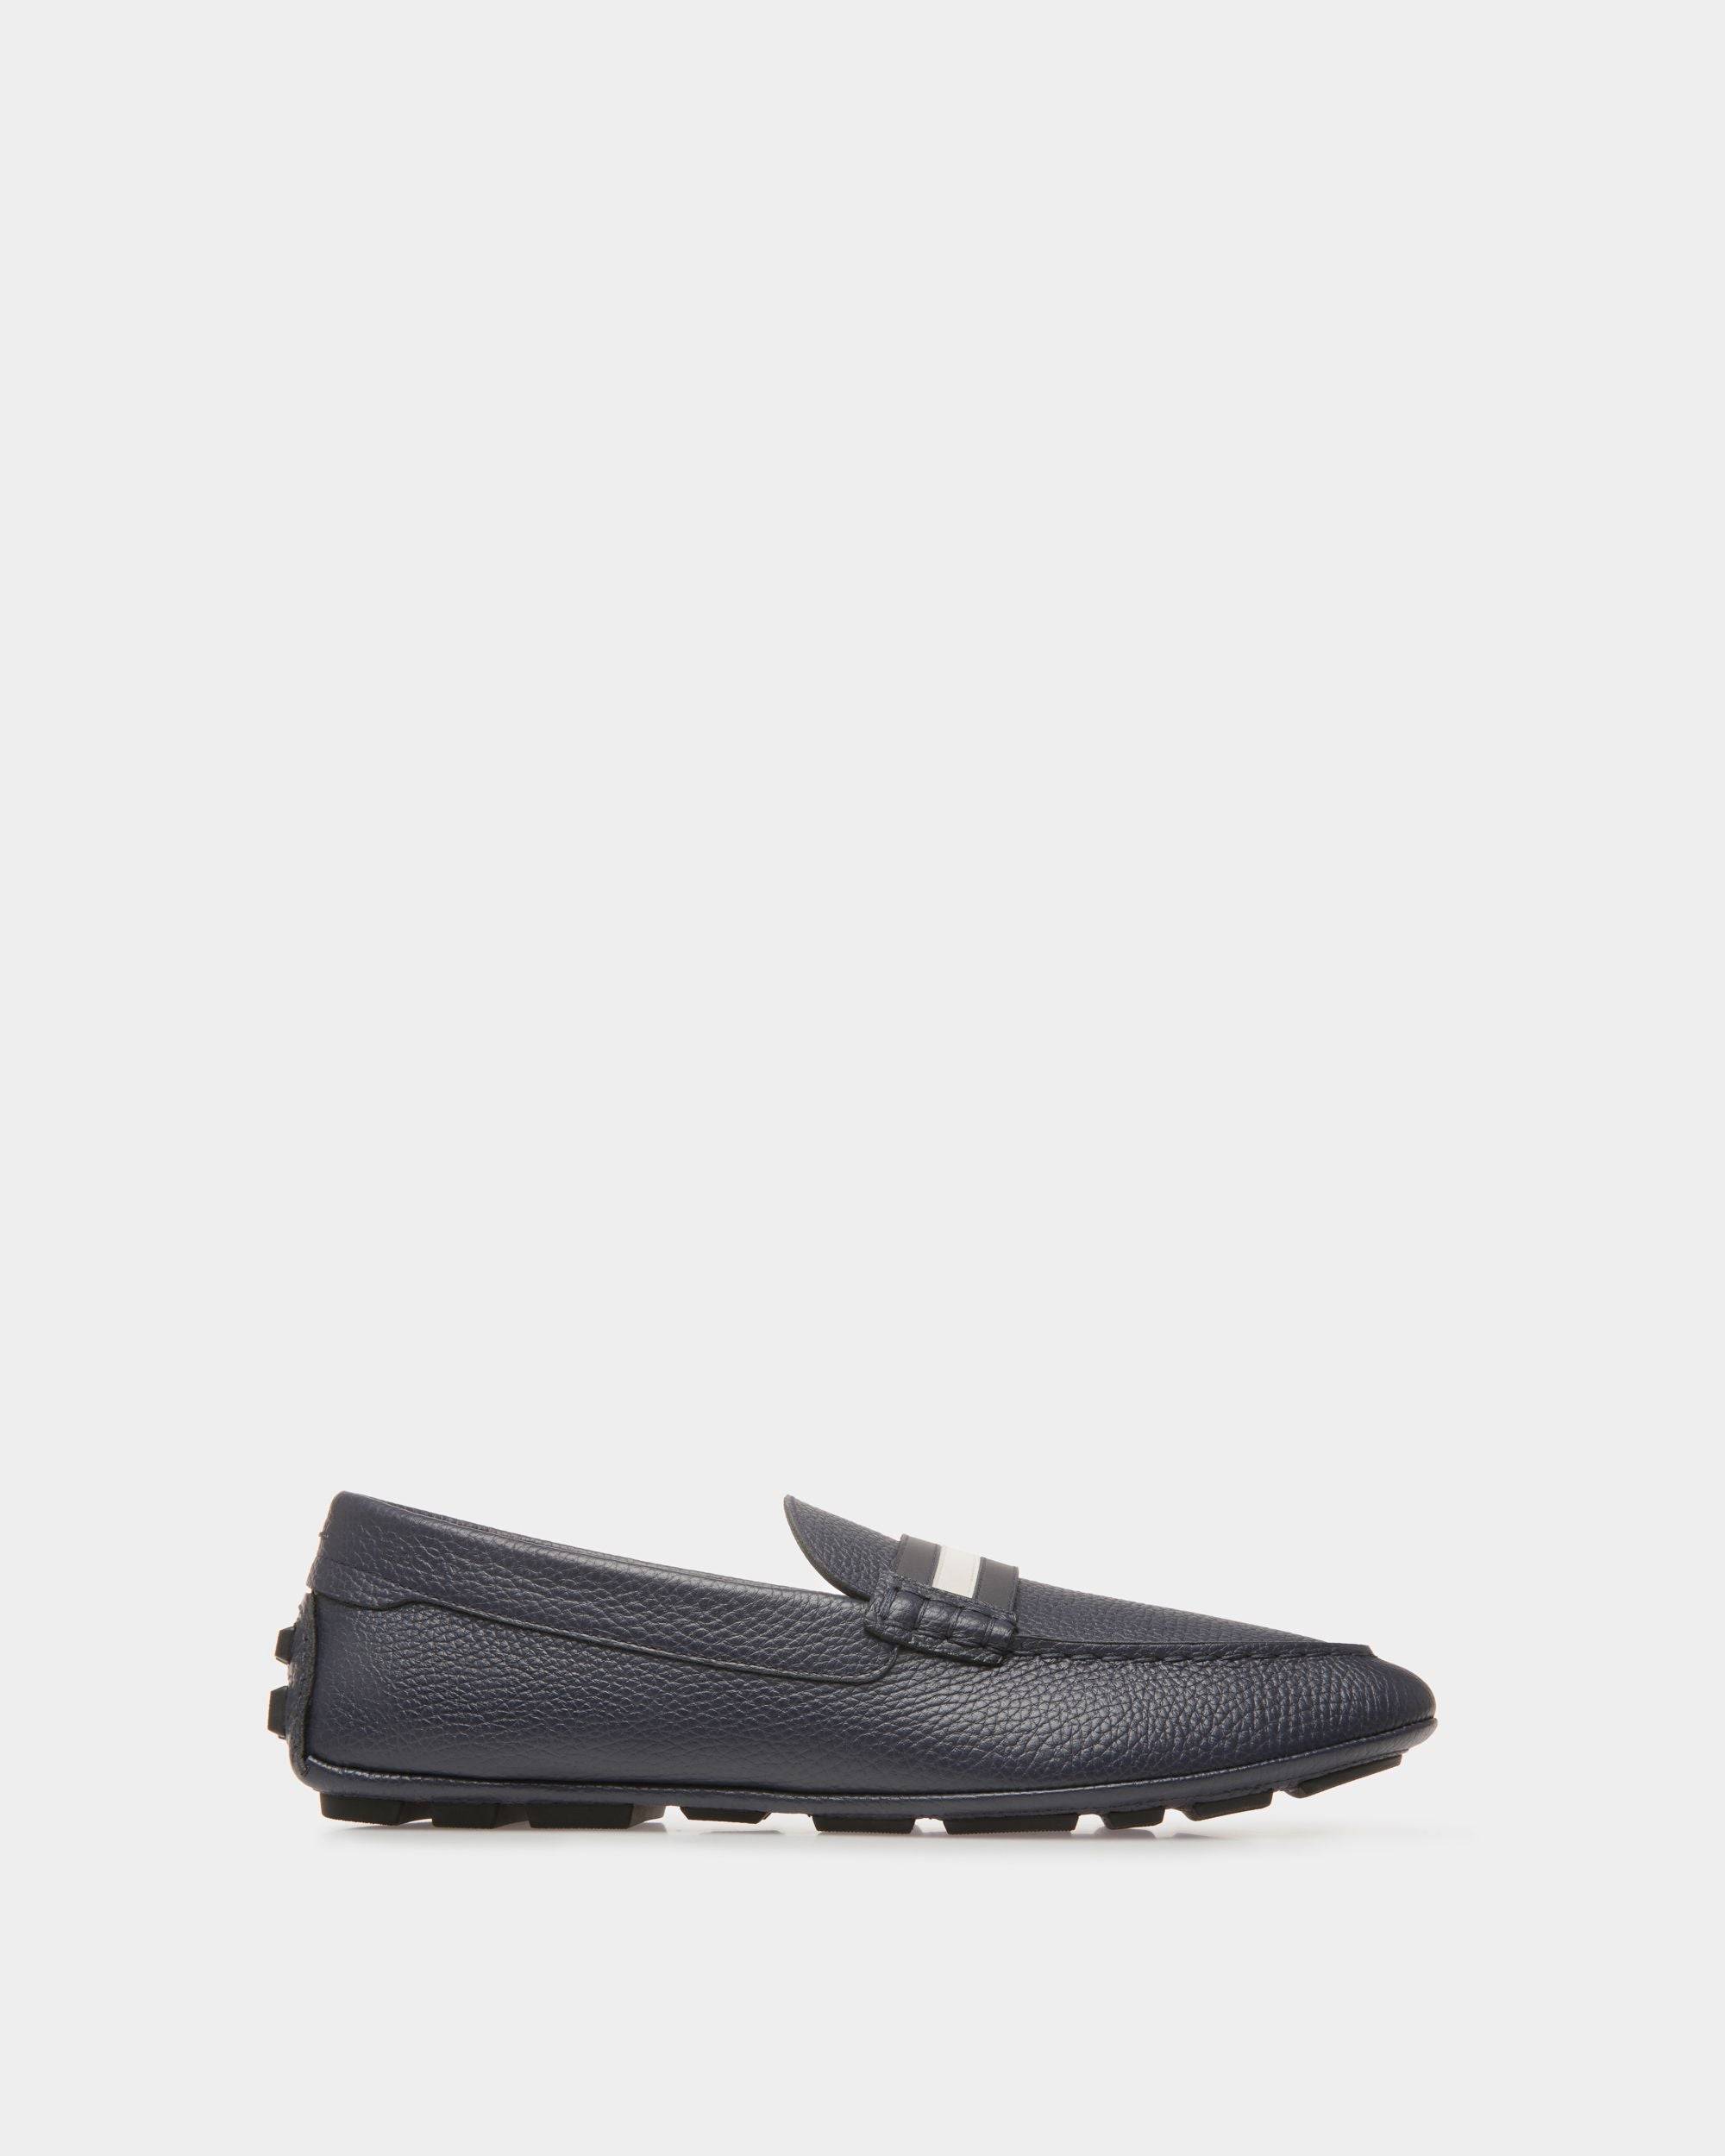 Men's Kerbs Drivers In Midnight Leather | Bally | Still Life Side